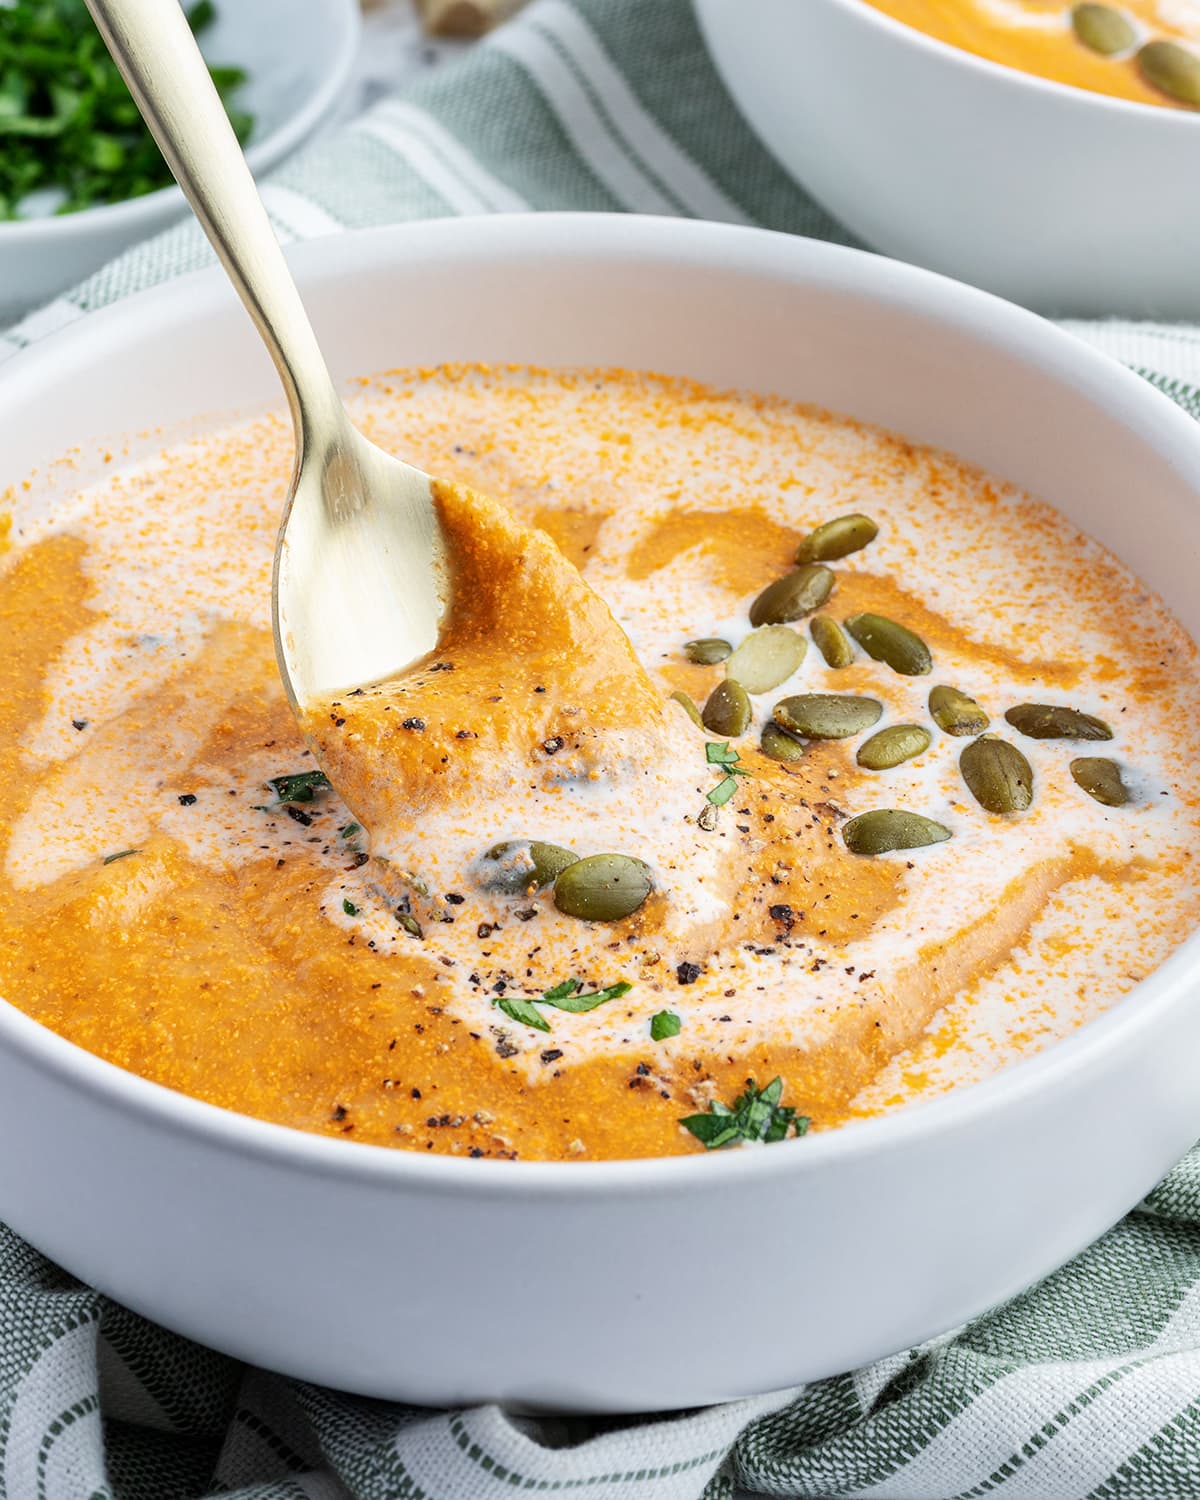 A spoon lifting out of a bowl of tomato and squash bisque.